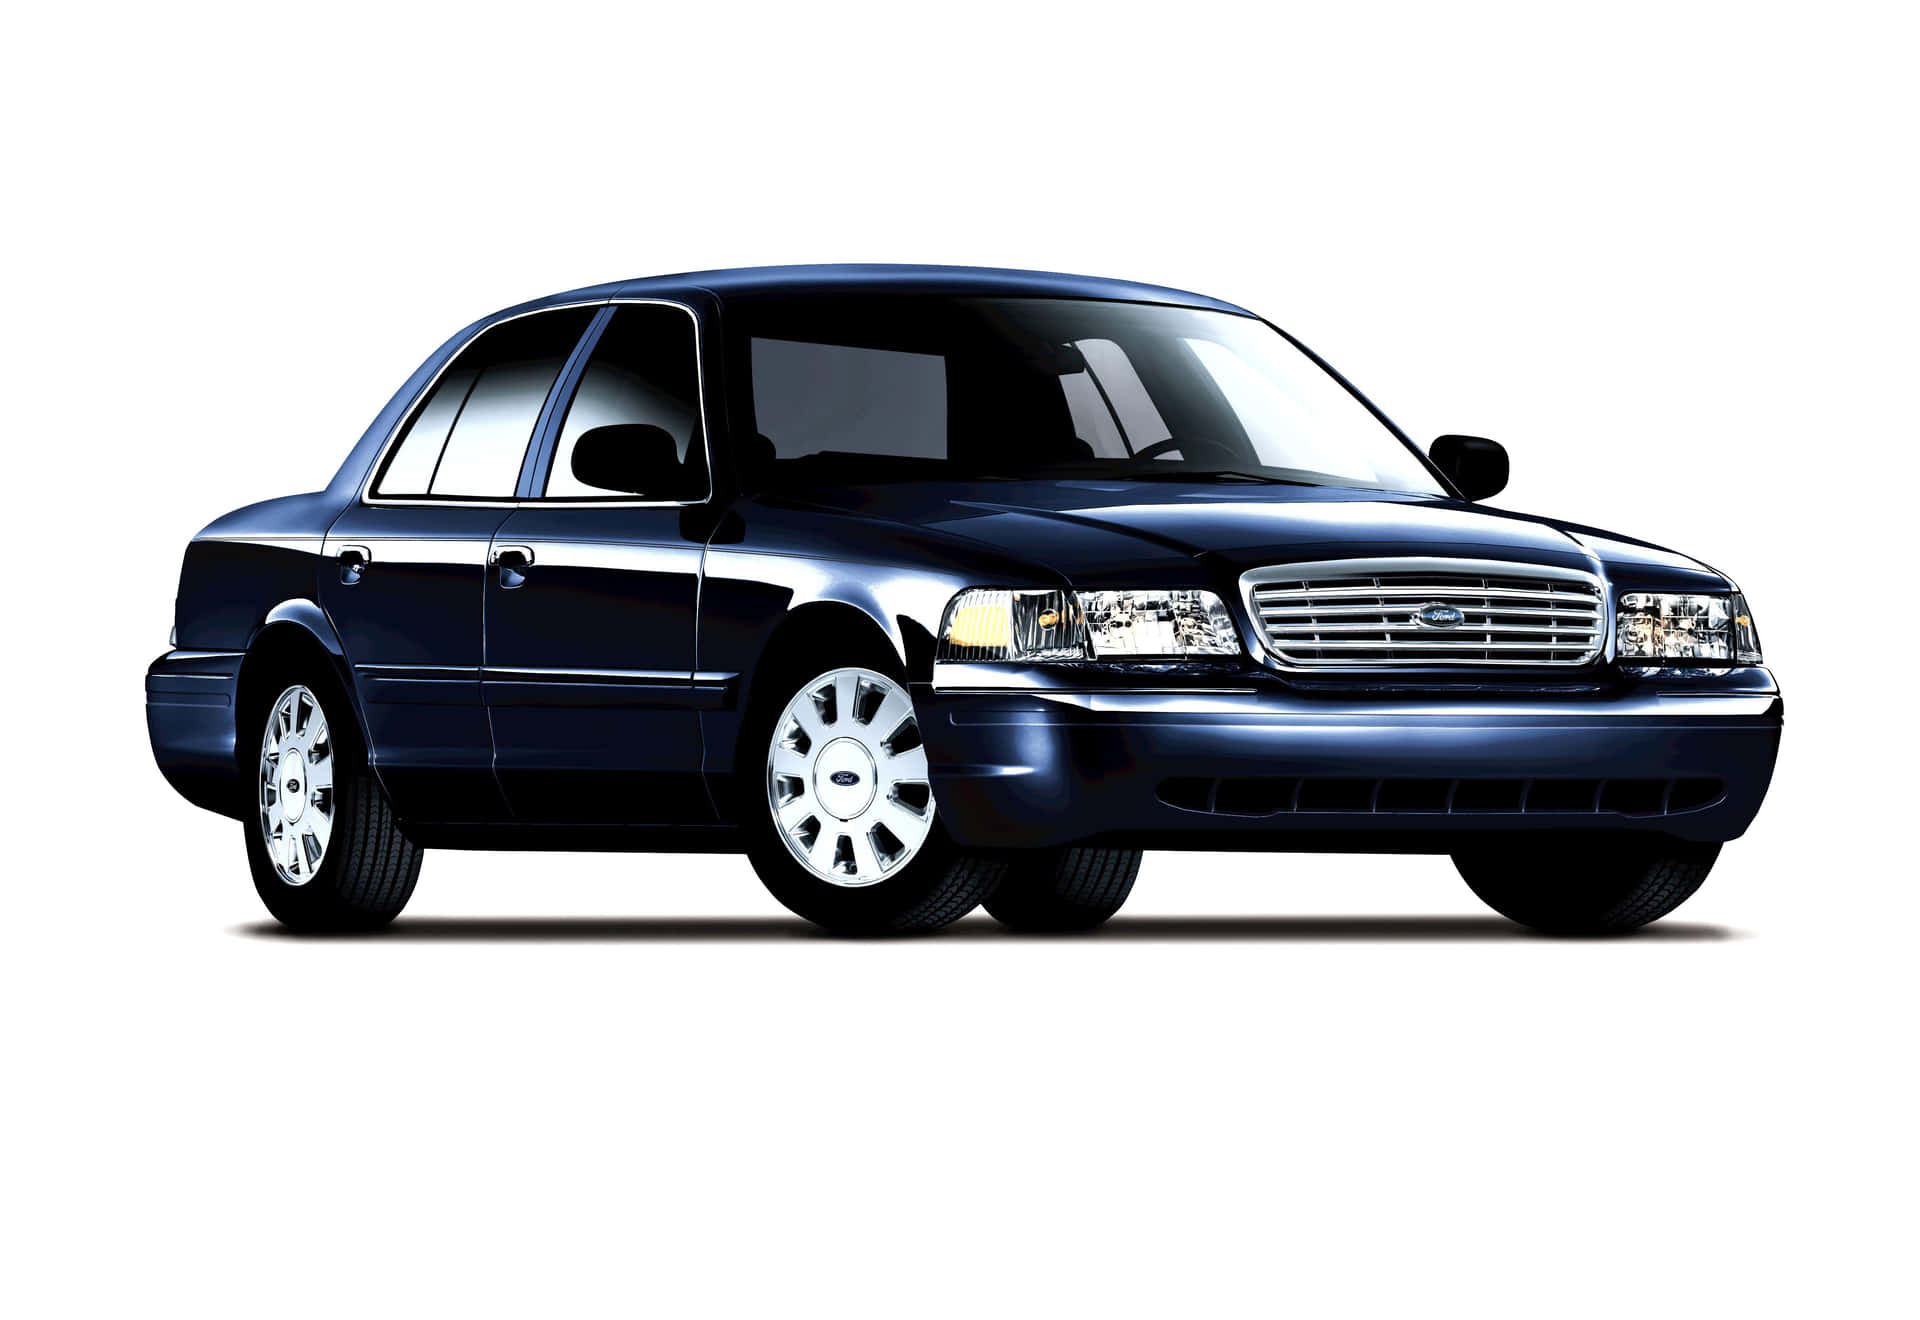 Sleek and Stylish Ford Crown Victoria Wallpaper